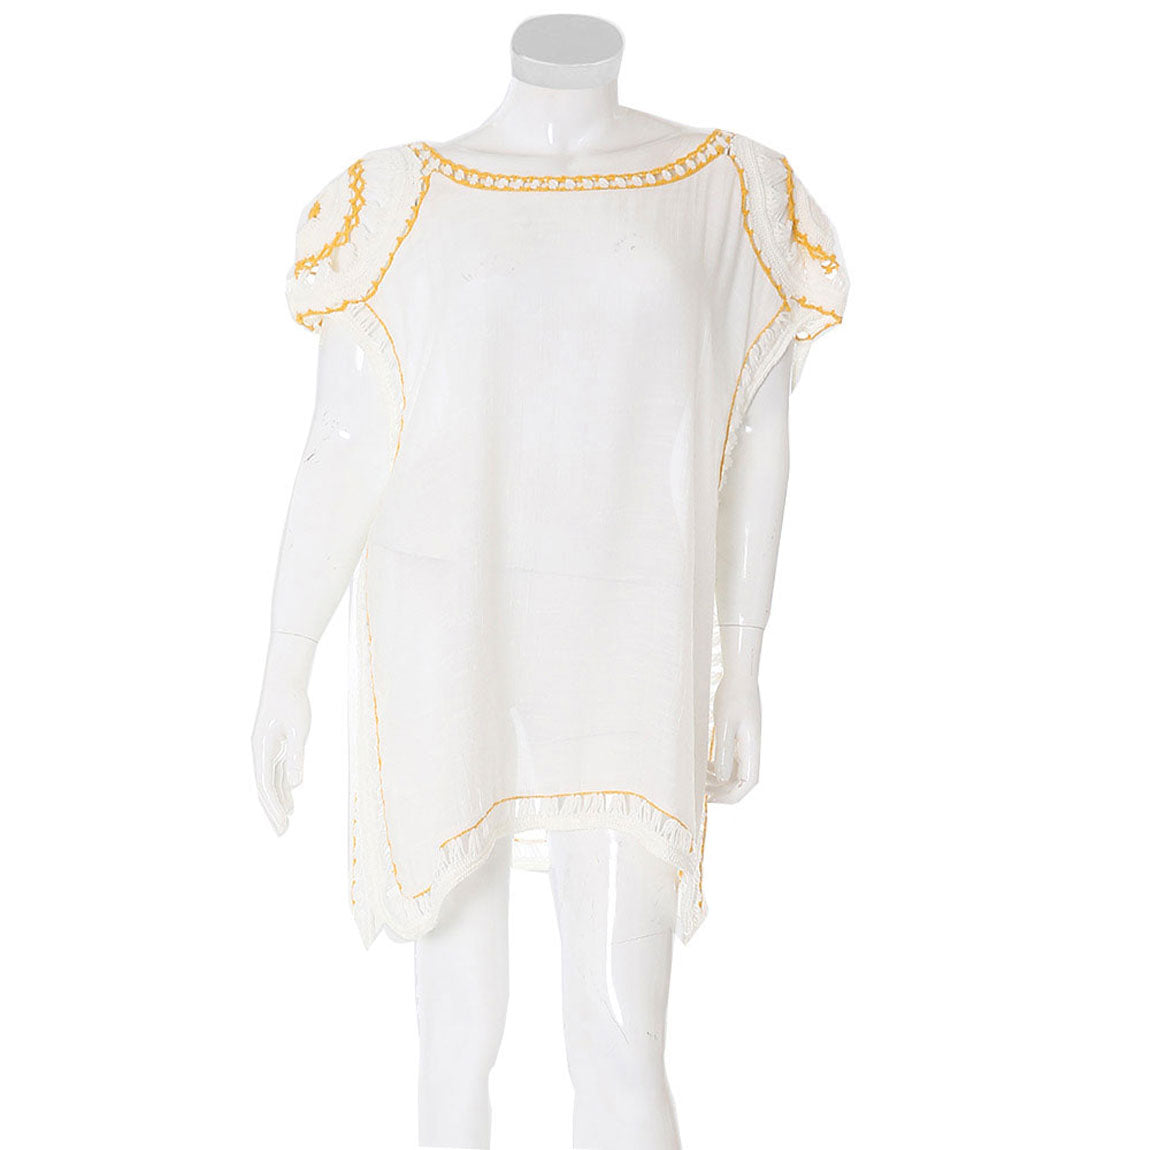 White Crochet Detailed Cover Up, The lightweight poncho top is made of soft and breathable Polyester material. short sleeve swimsuit cover up with open front design, simple basic style, easy to put on and down. Perfect Gift for Wife, Mom, Birthday, Holiday, Anniversary, Fun Night Out.